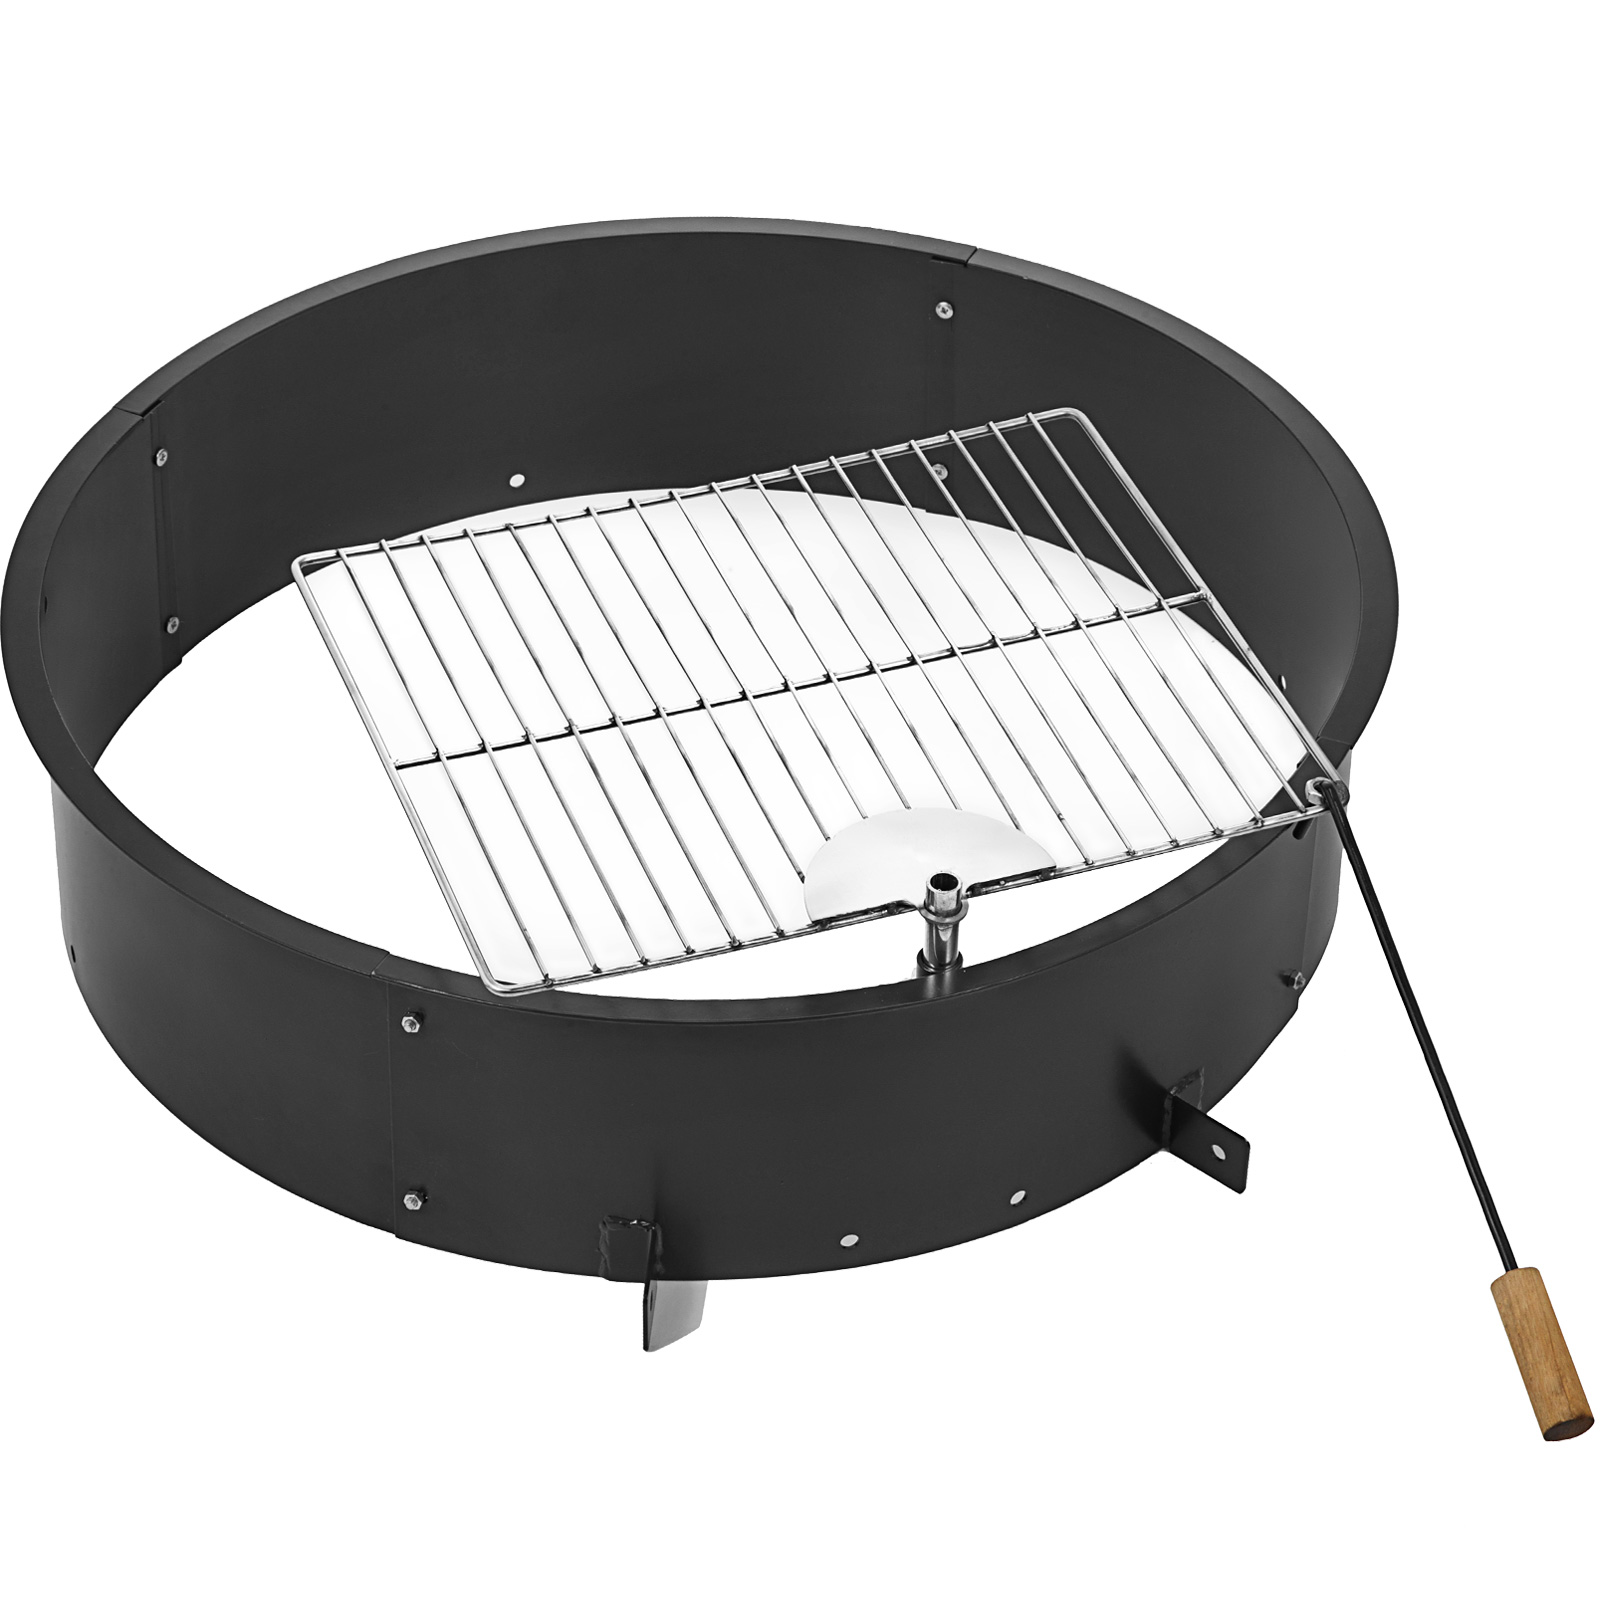 Bbq Grill Fire Bowl Durable Steel, 36 Inch Fire Pit Bowl Replacement